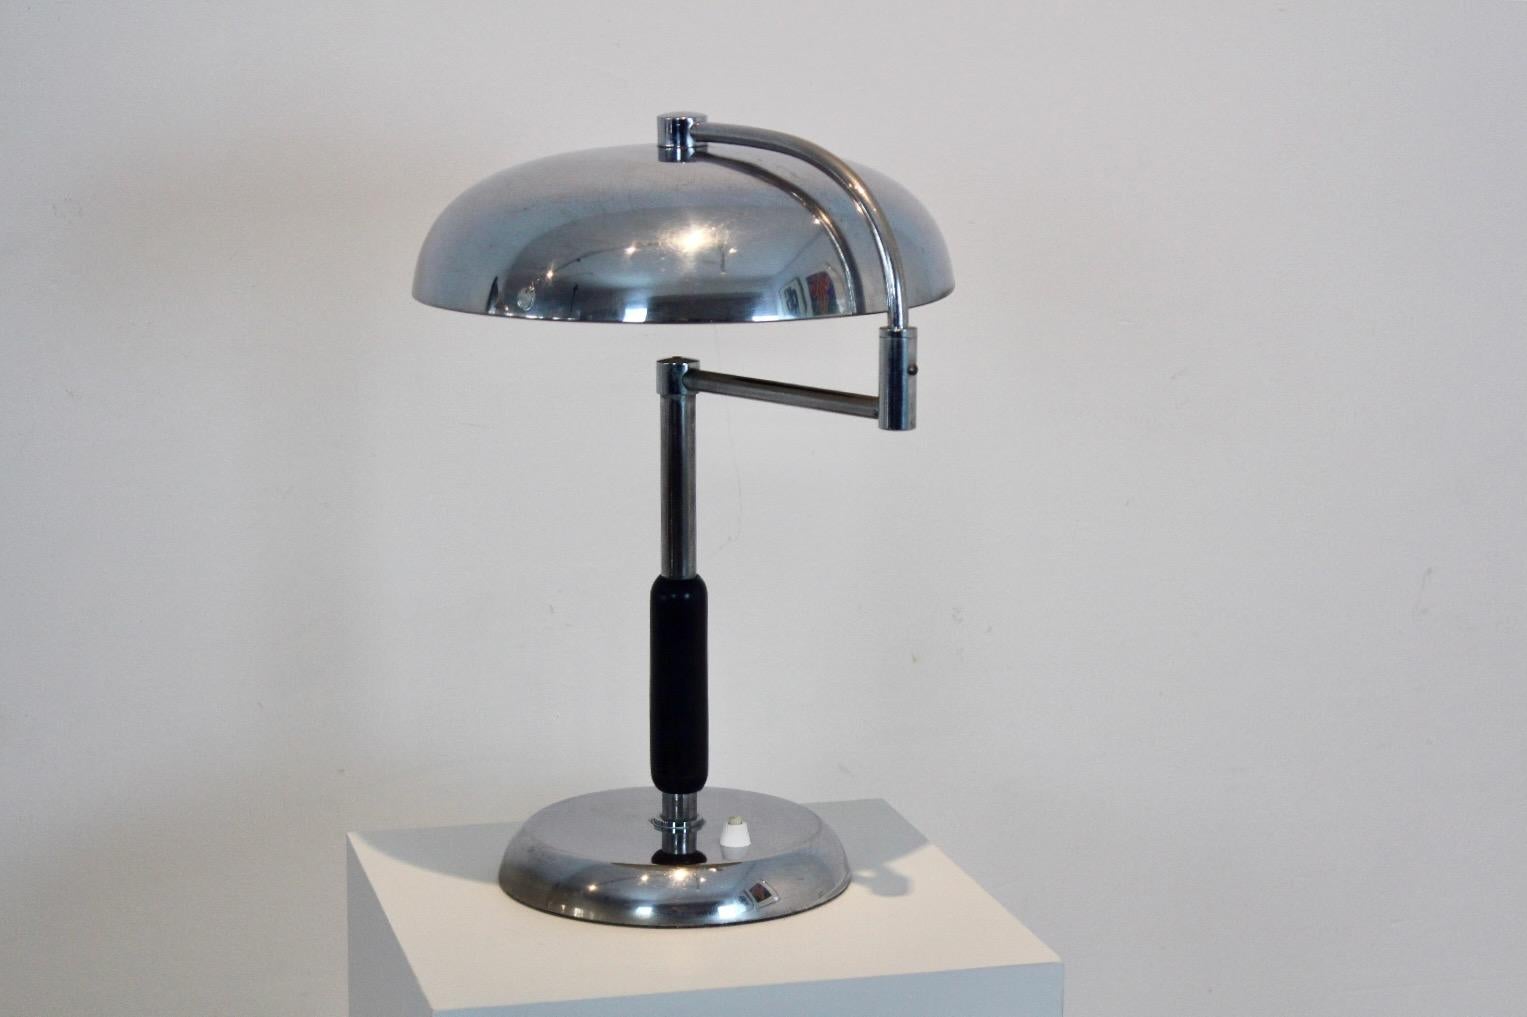 The Maison Desny desk lamp is a Classic example of modernist design from the 1930s. Maison Desny was a progressive design studio creating the most modern, avant-garde art works, known for his innovative use of materials and shapes in it’s design.